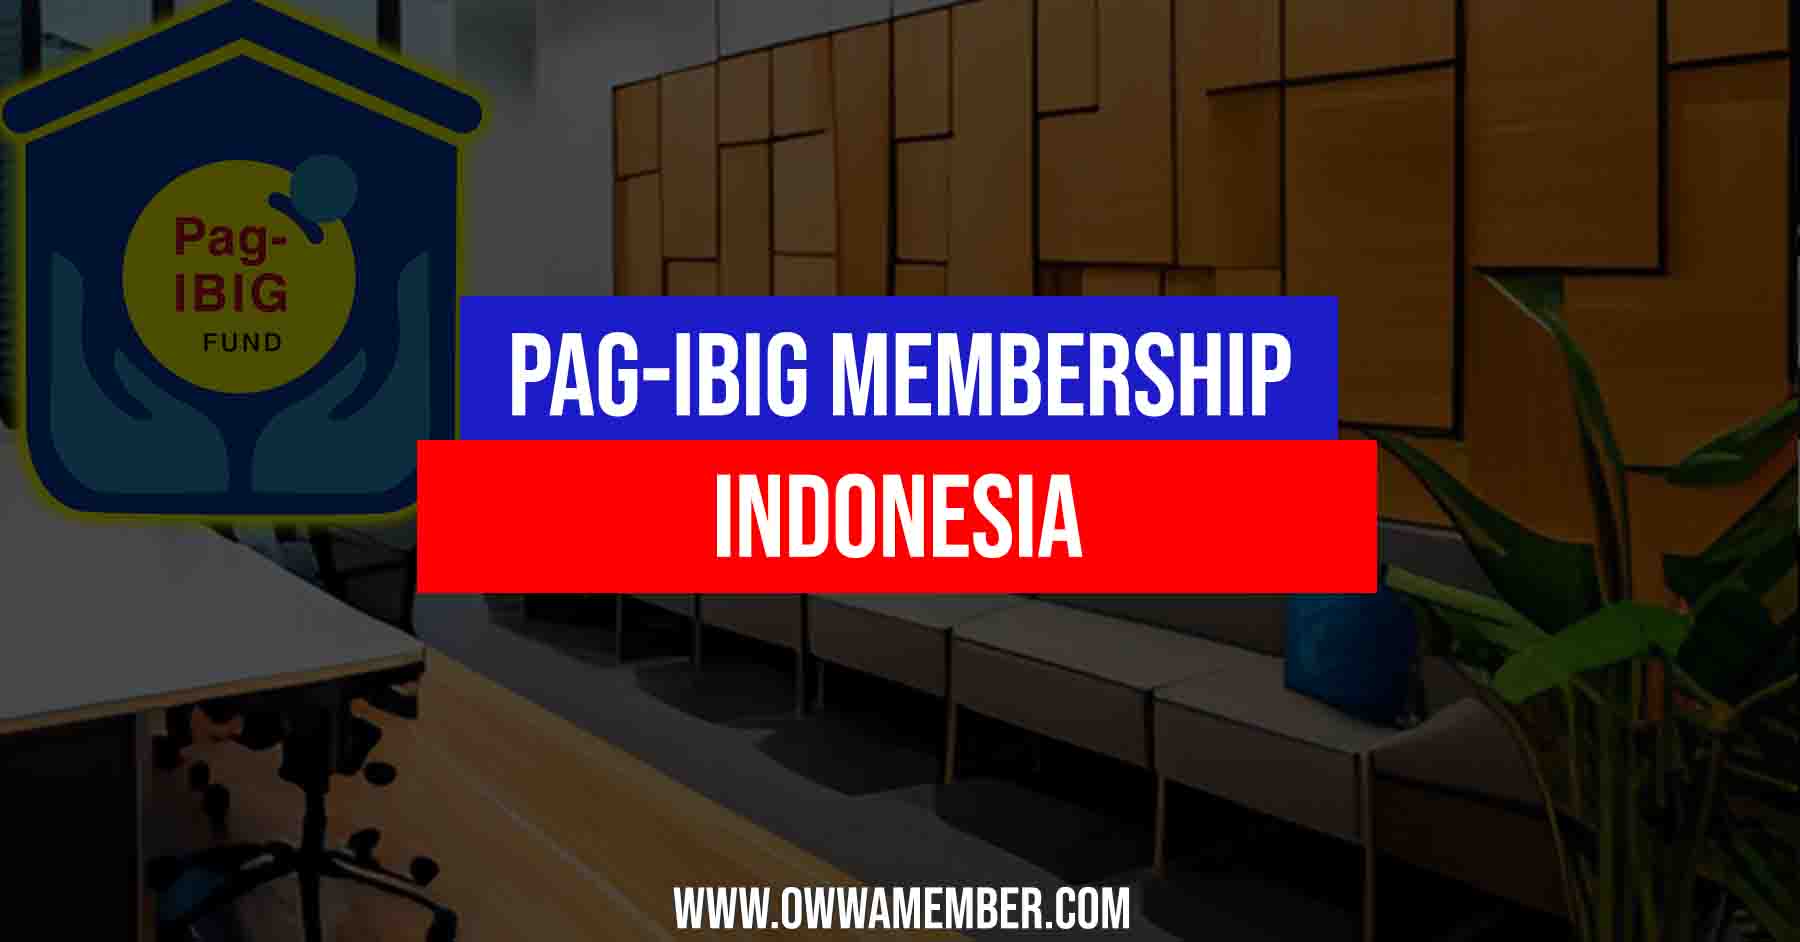 apply pag-ibig membership in indonesia for ofw